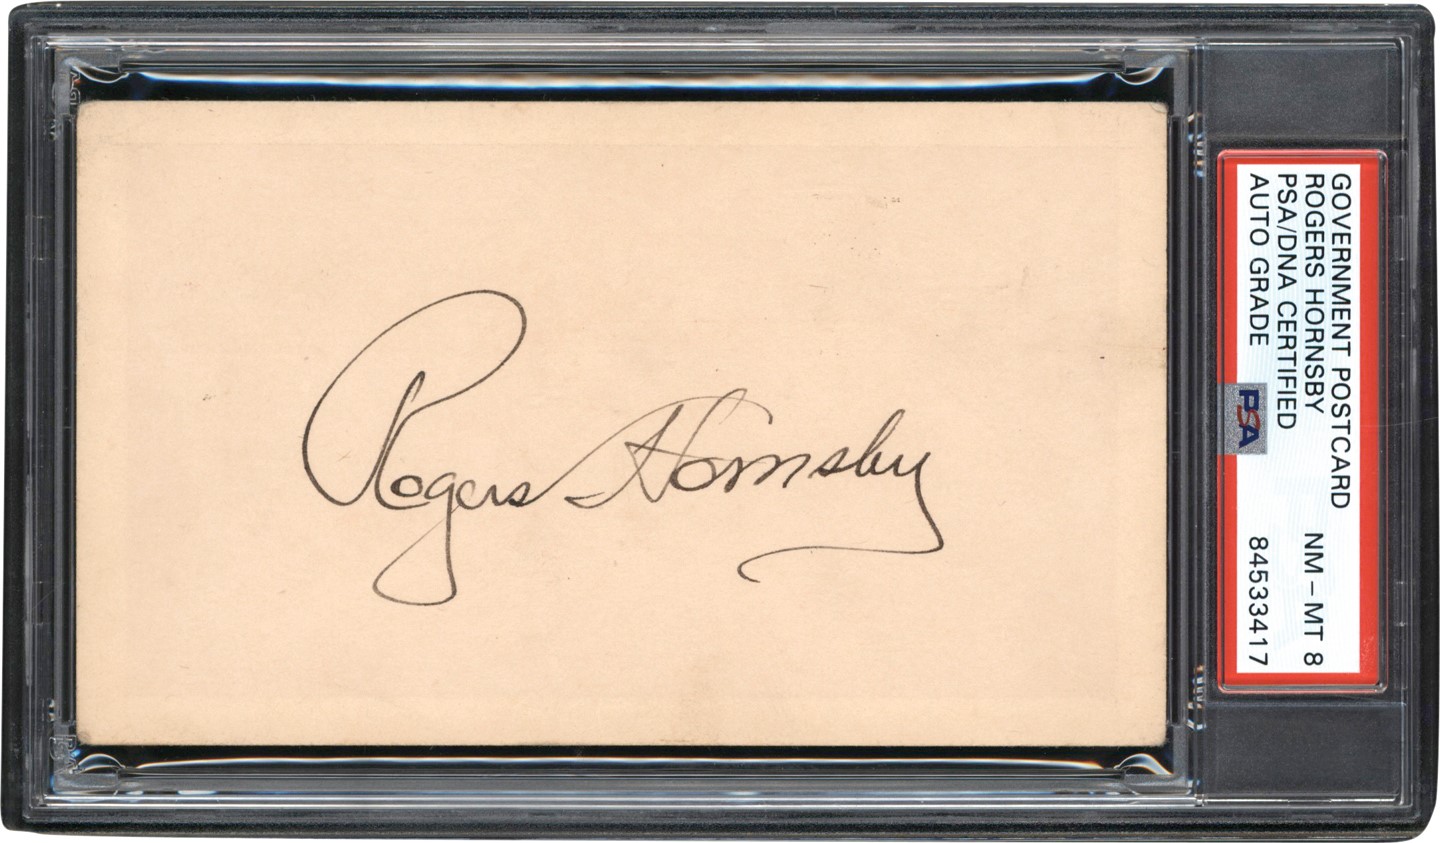 Baseball Autographs - Rogers Hornsby Signed Government Postcard (PSA NM-MT 8 Auto)